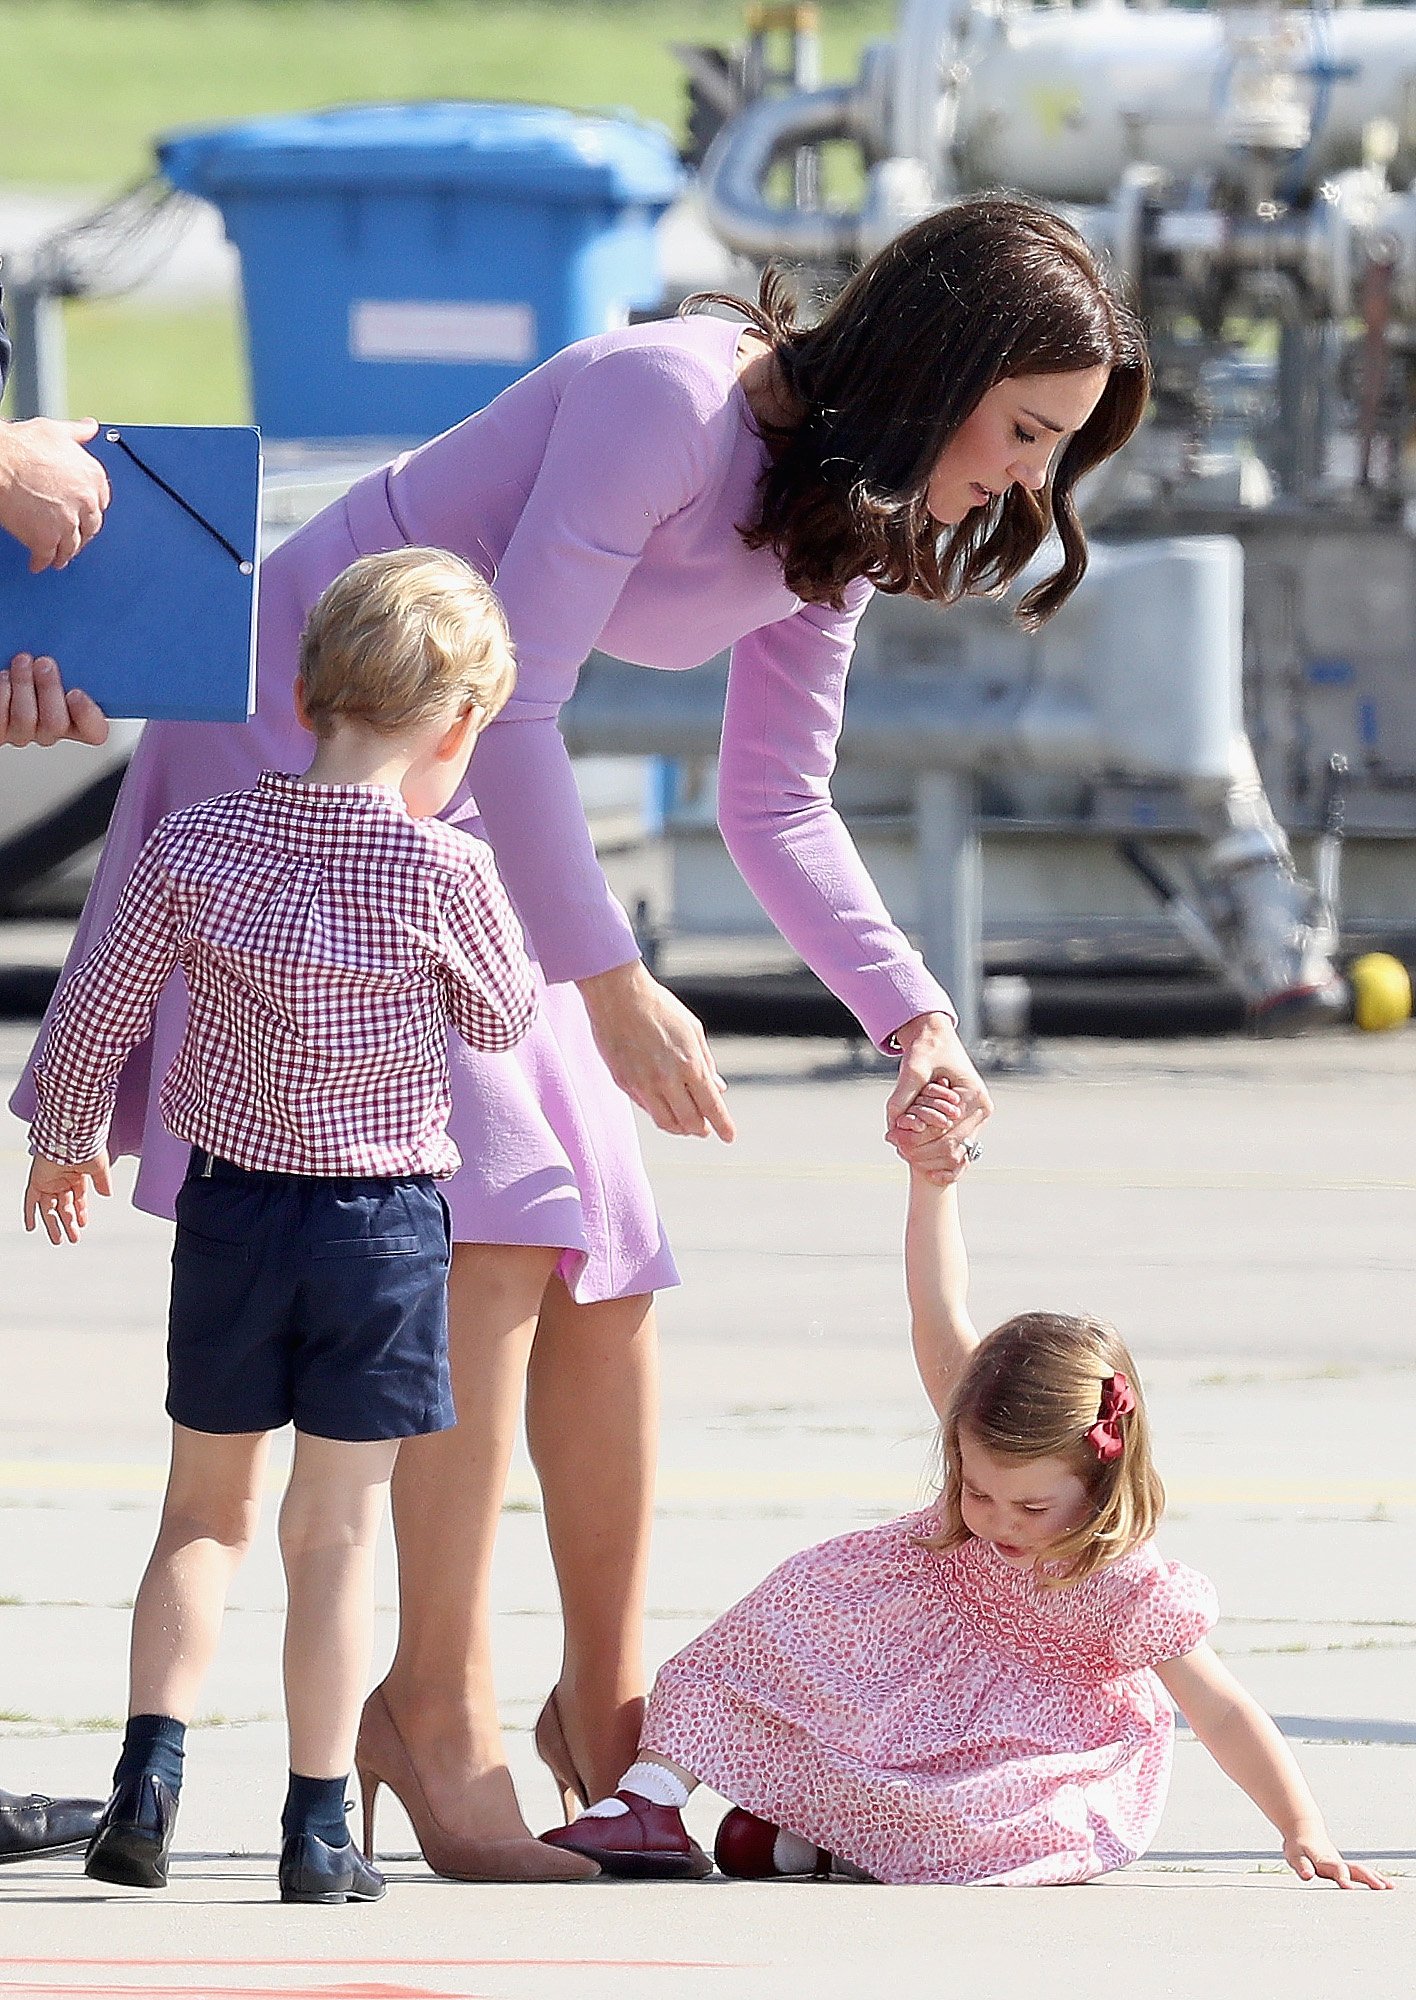 Prince George, Duchess Kate, and Princess Charlotte view helicopter models before departing from Hamburg airport during their official visit to Poland and Germany on July 21, 2017, in Hamburg, Germany | Source: Getty Images